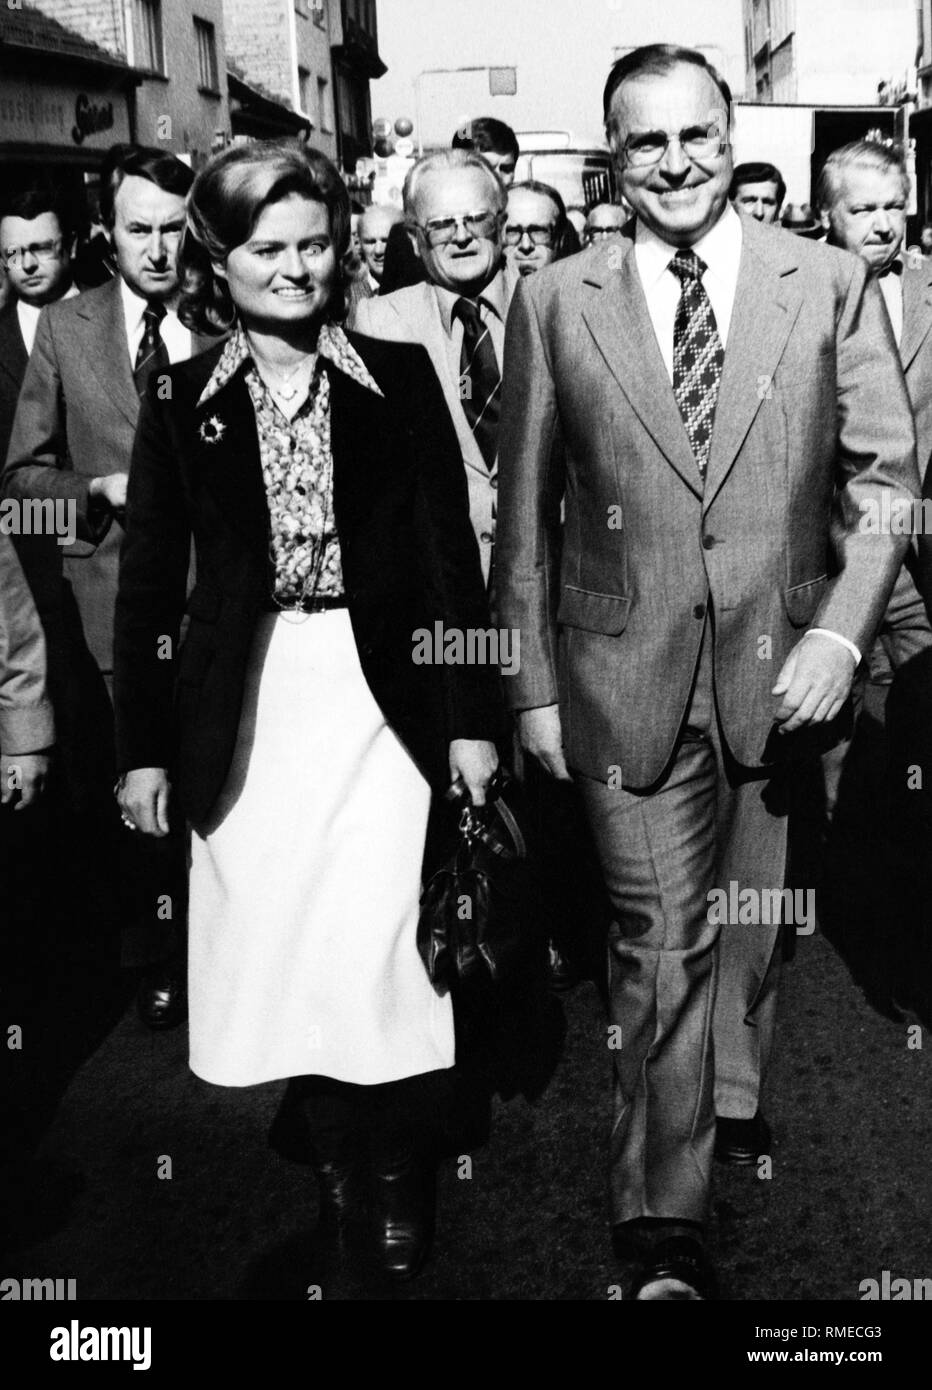 Helmut Kohl (right) with his wife Hannelore Kohl (left), traveling as chancellor candidate of the Union during the federal election campaign in 1976. Stock Photo